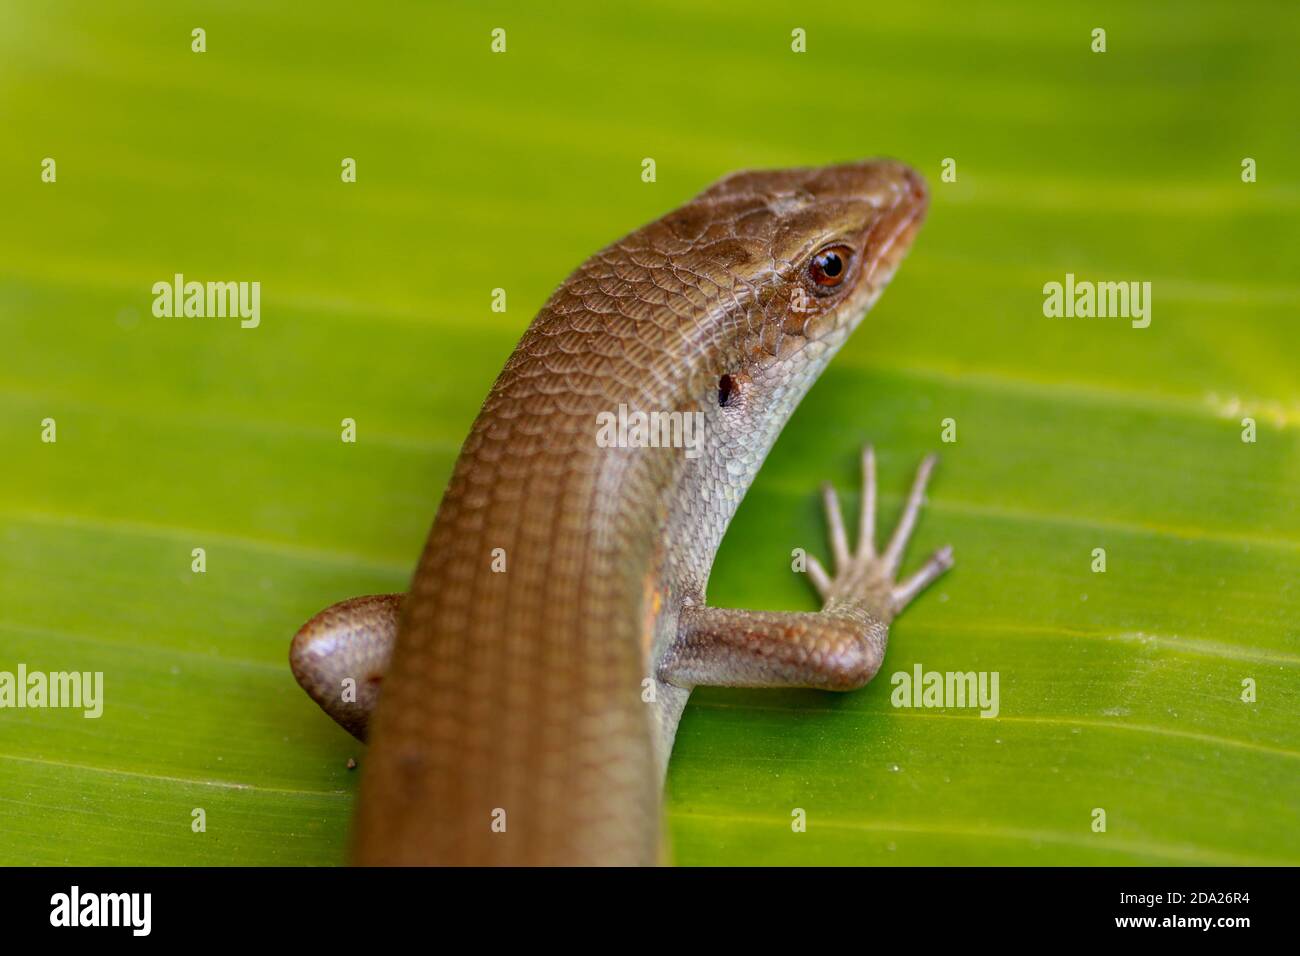 East Indian Brown Skin, Many-lined Sun Skink, or Common Sun Skink, while the scientific name, Eutropis multifasciata, East Indian Brown Skink in the Stock Photo